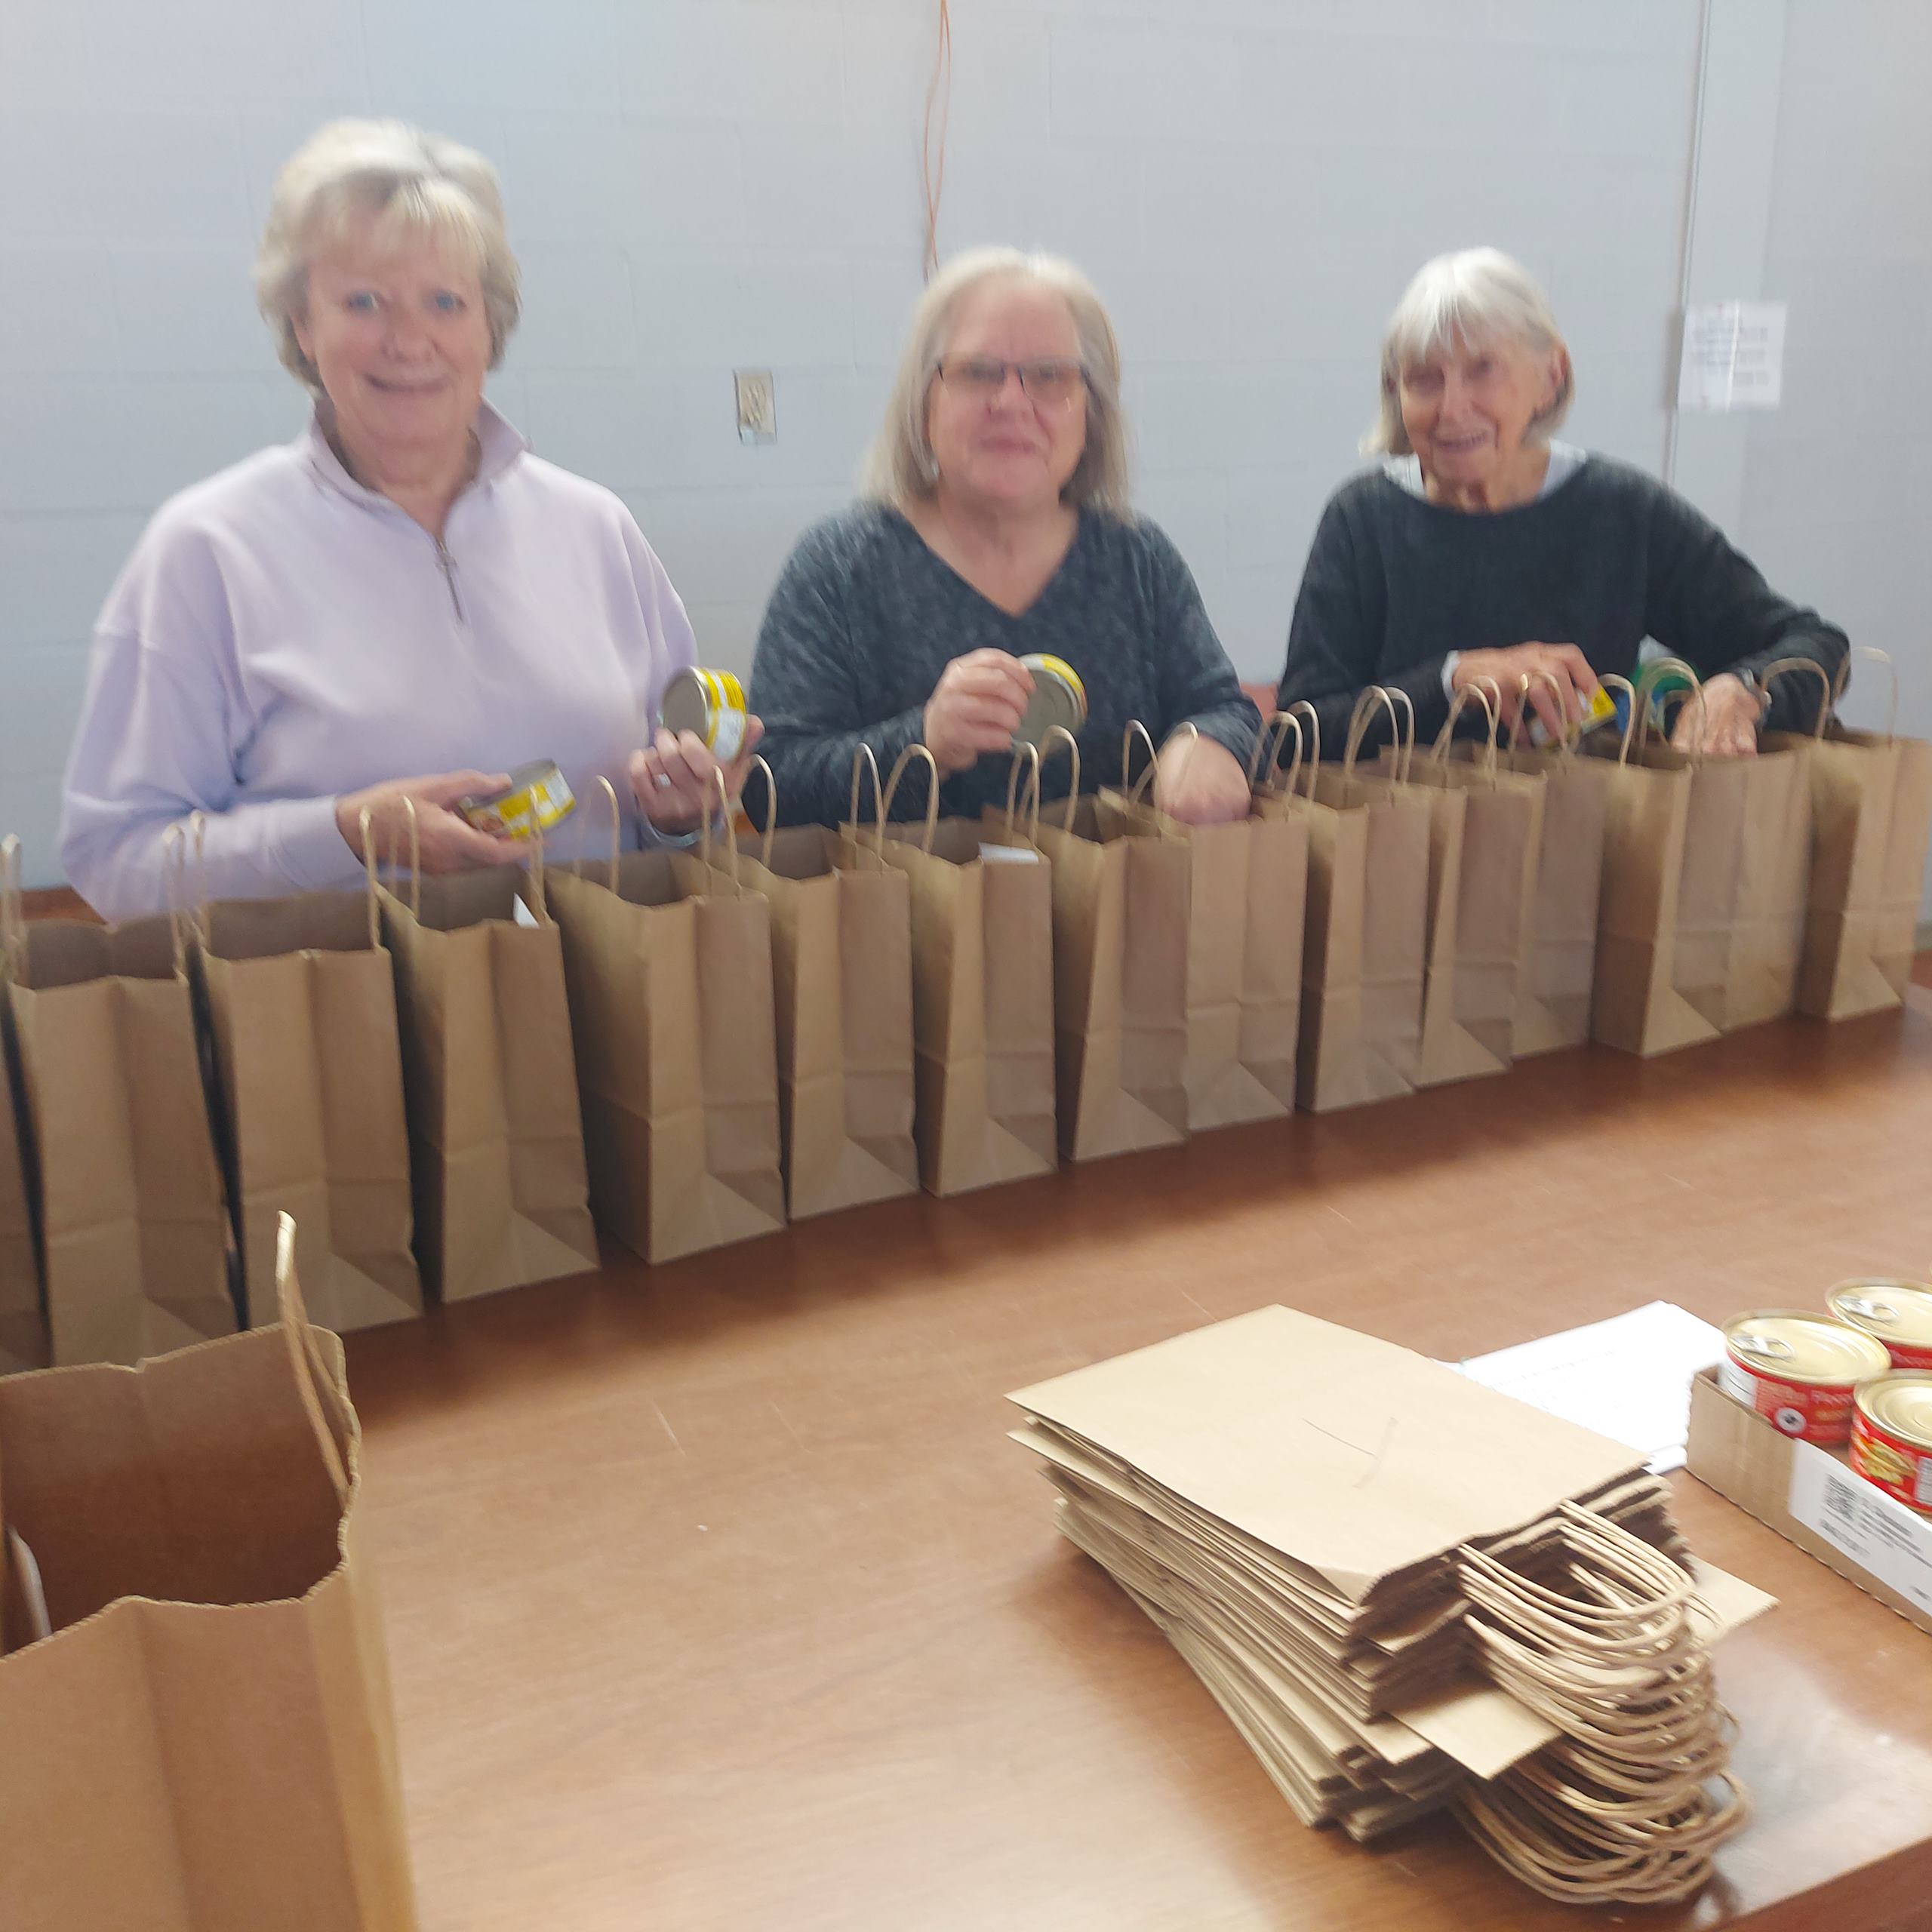 Volunteers assemble the meal kits.